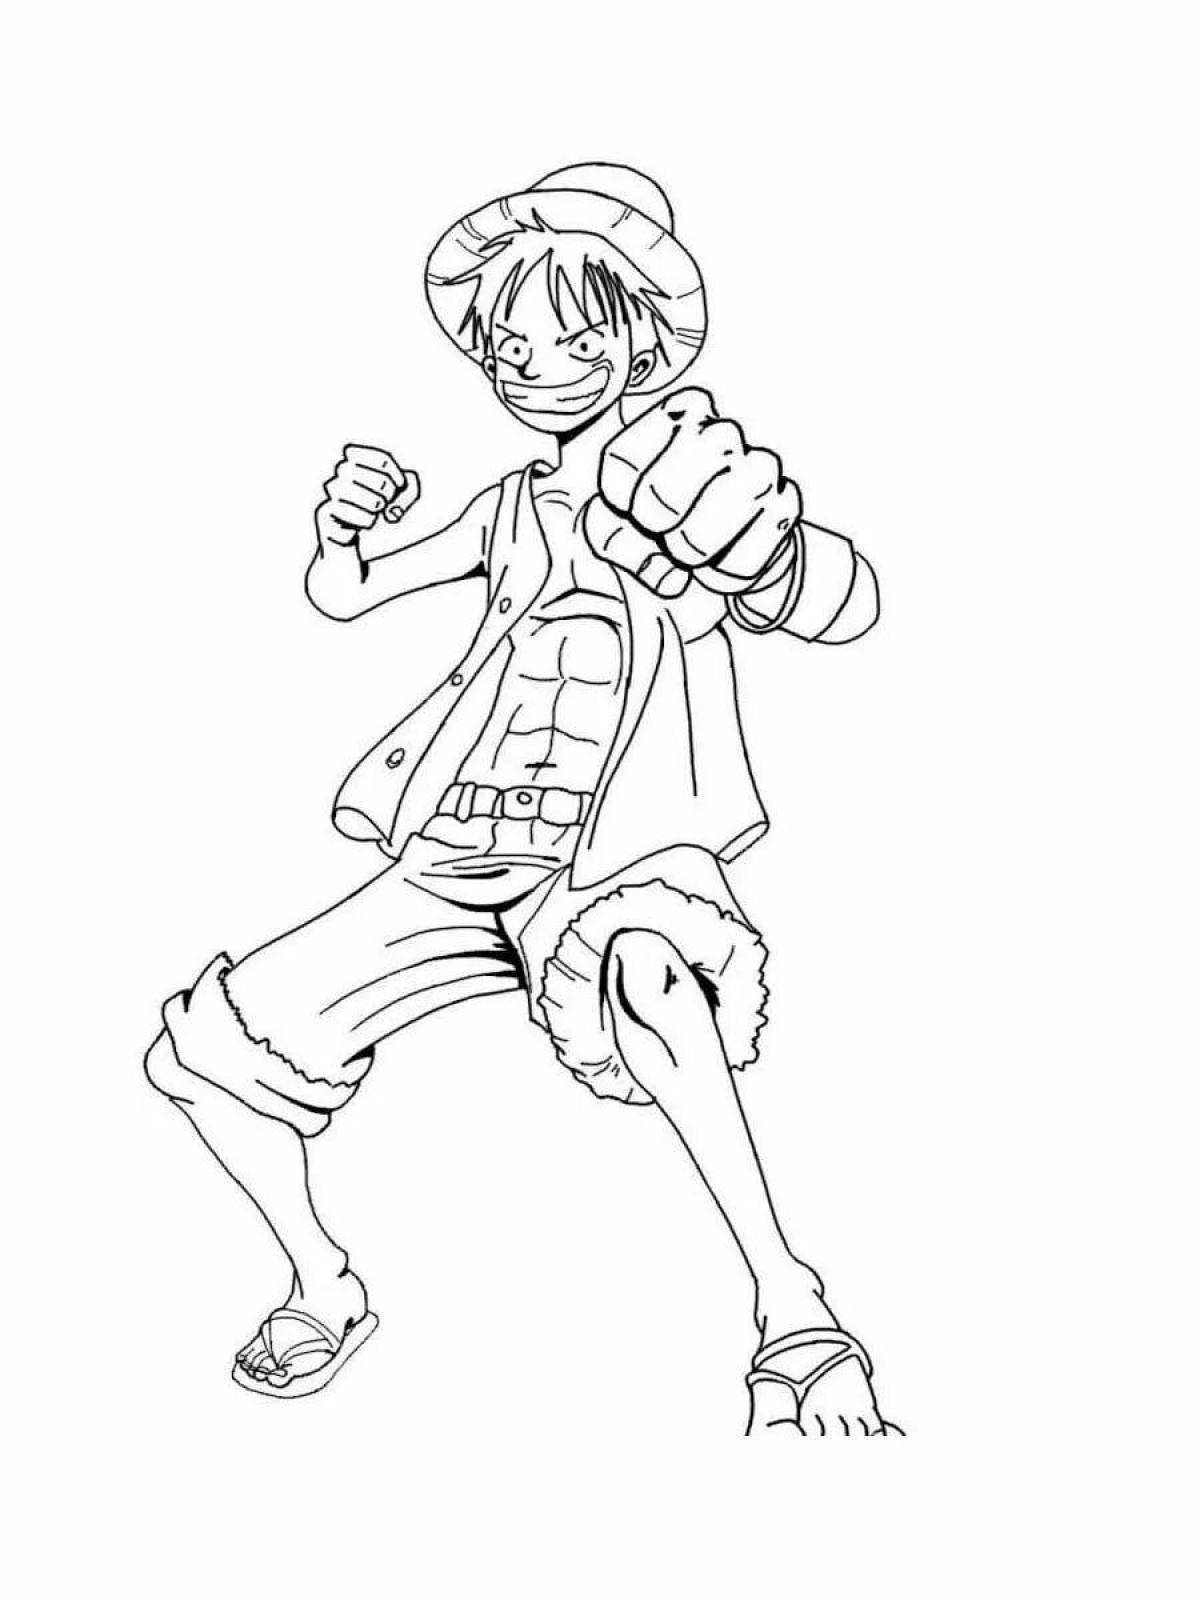 Fun luffy one piece coloring page